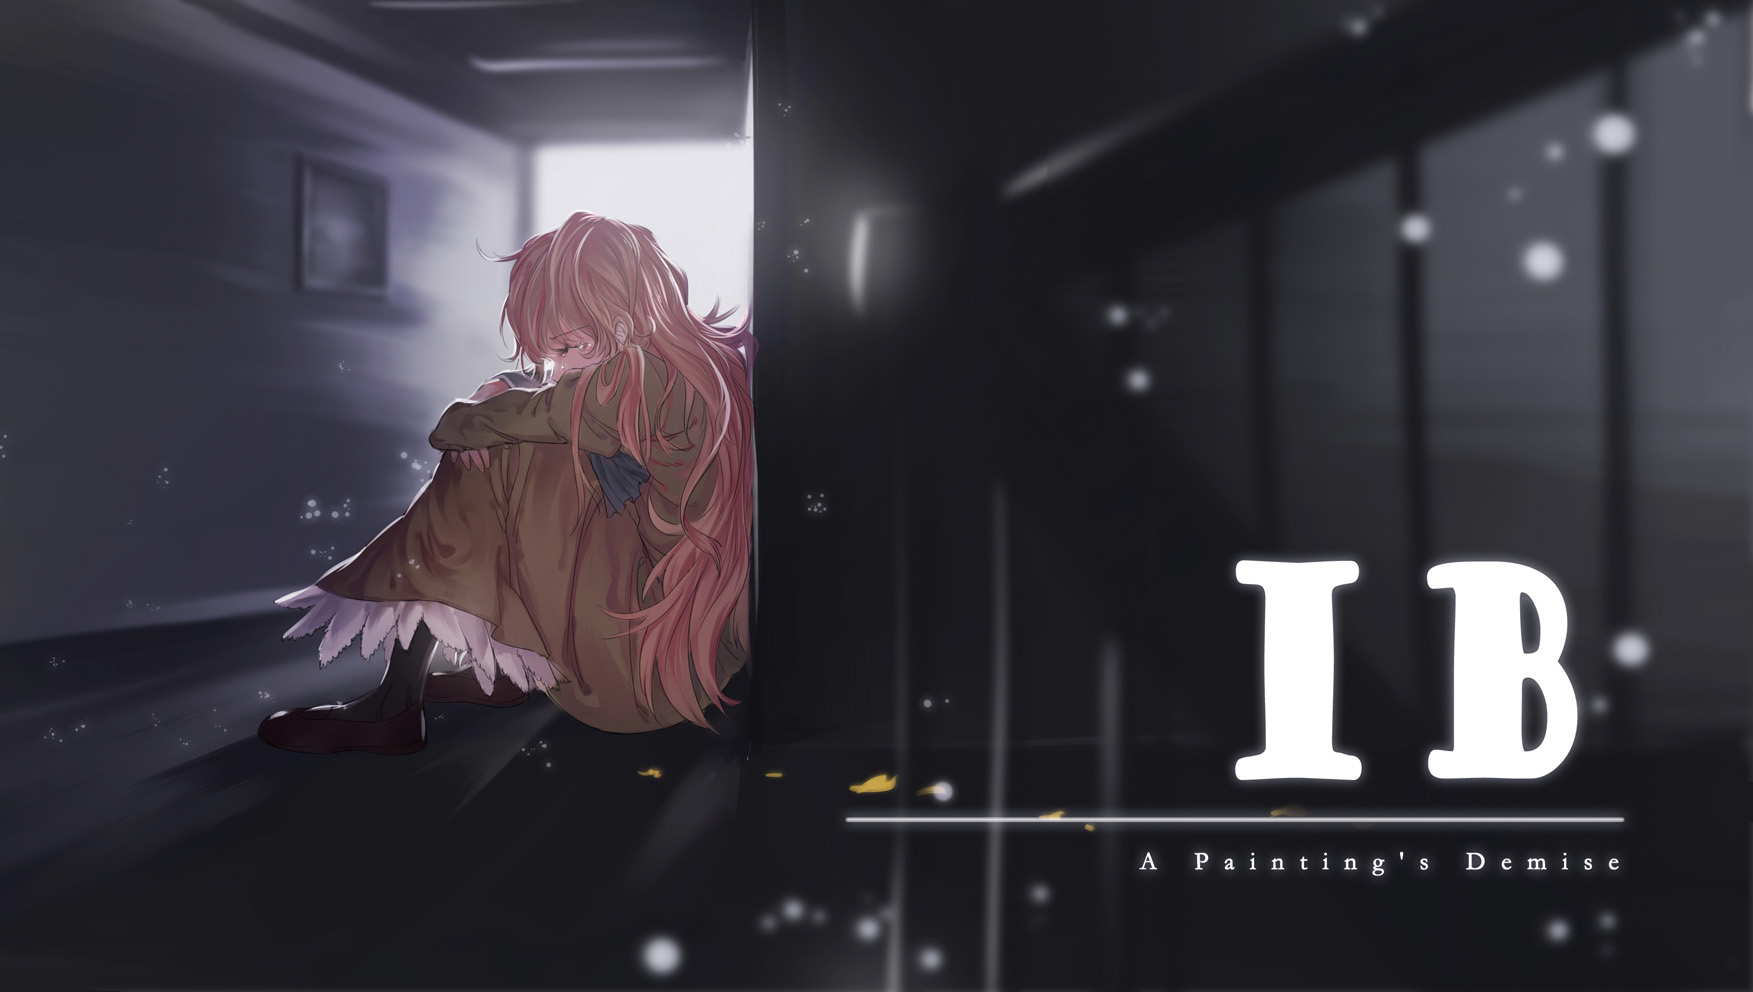 【IB】A Painting's Demise